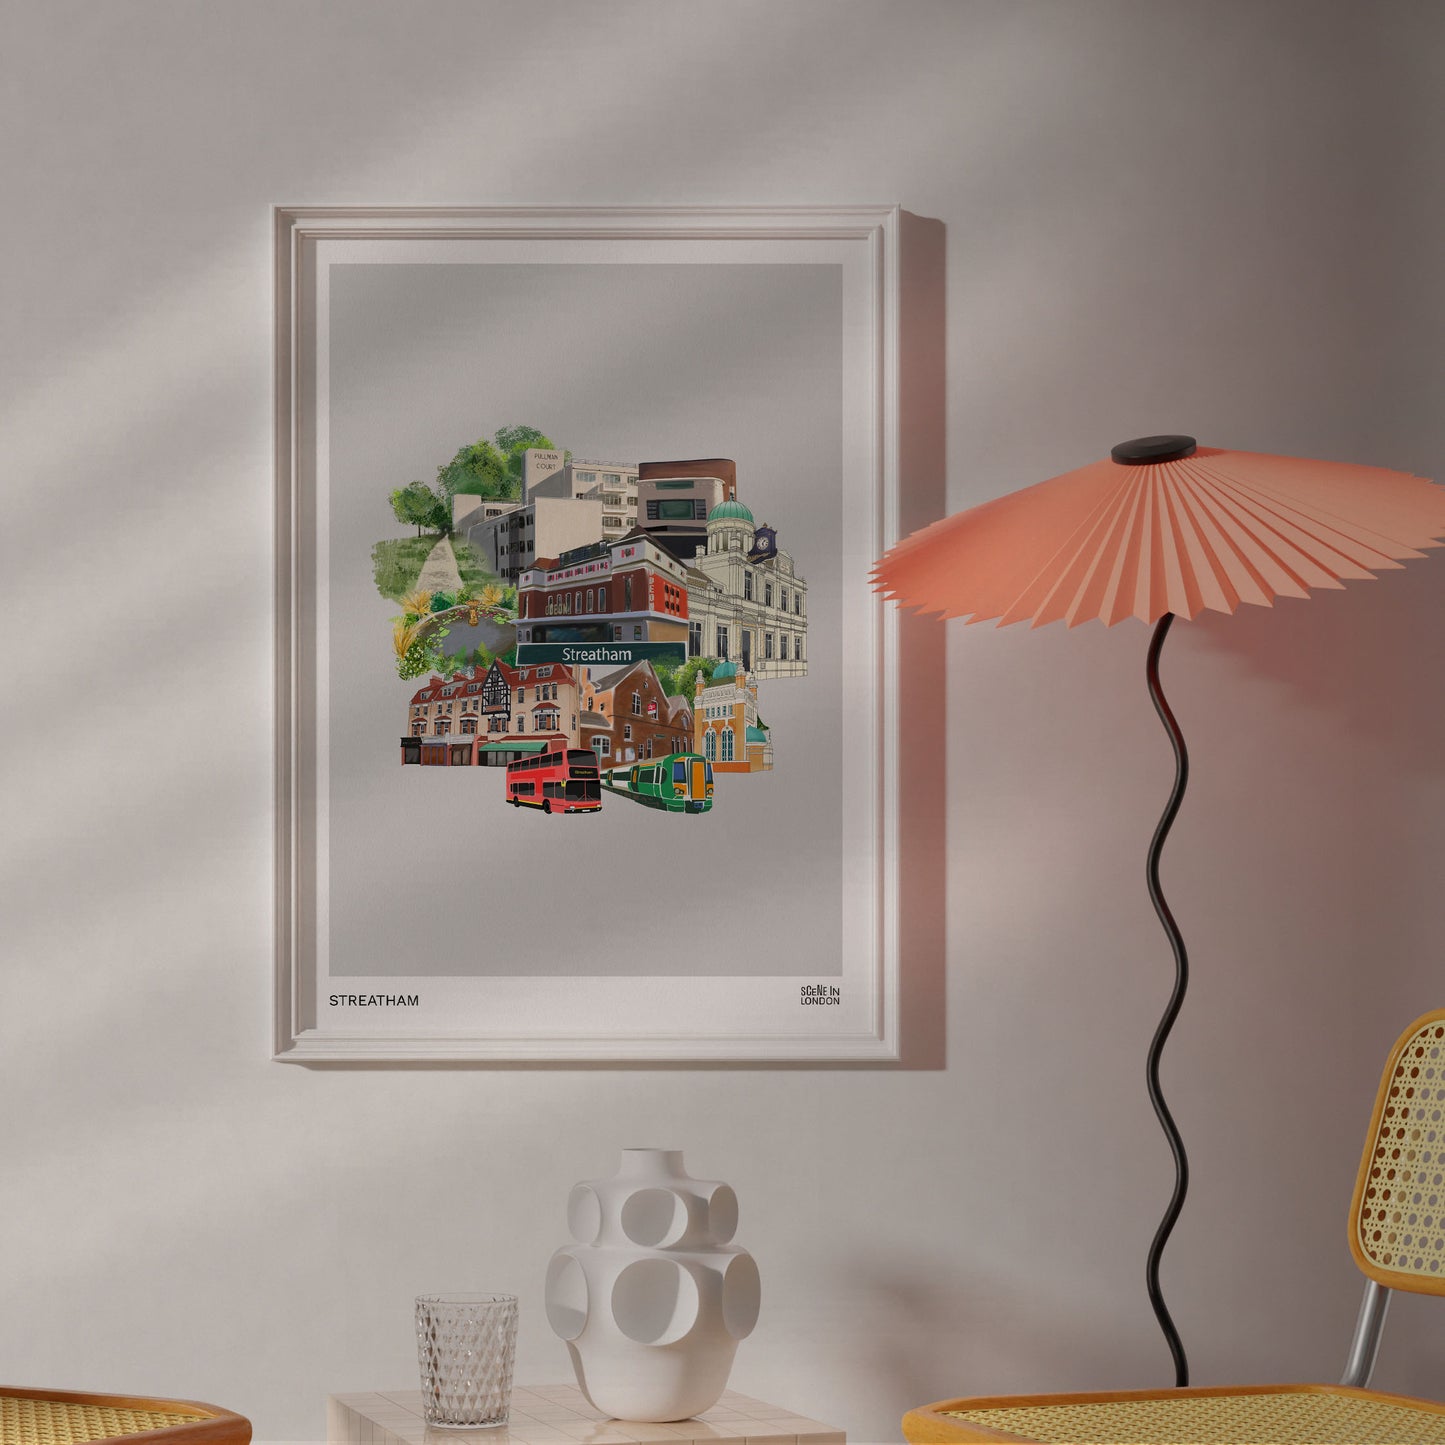 Streatham London art print with places in Streatham